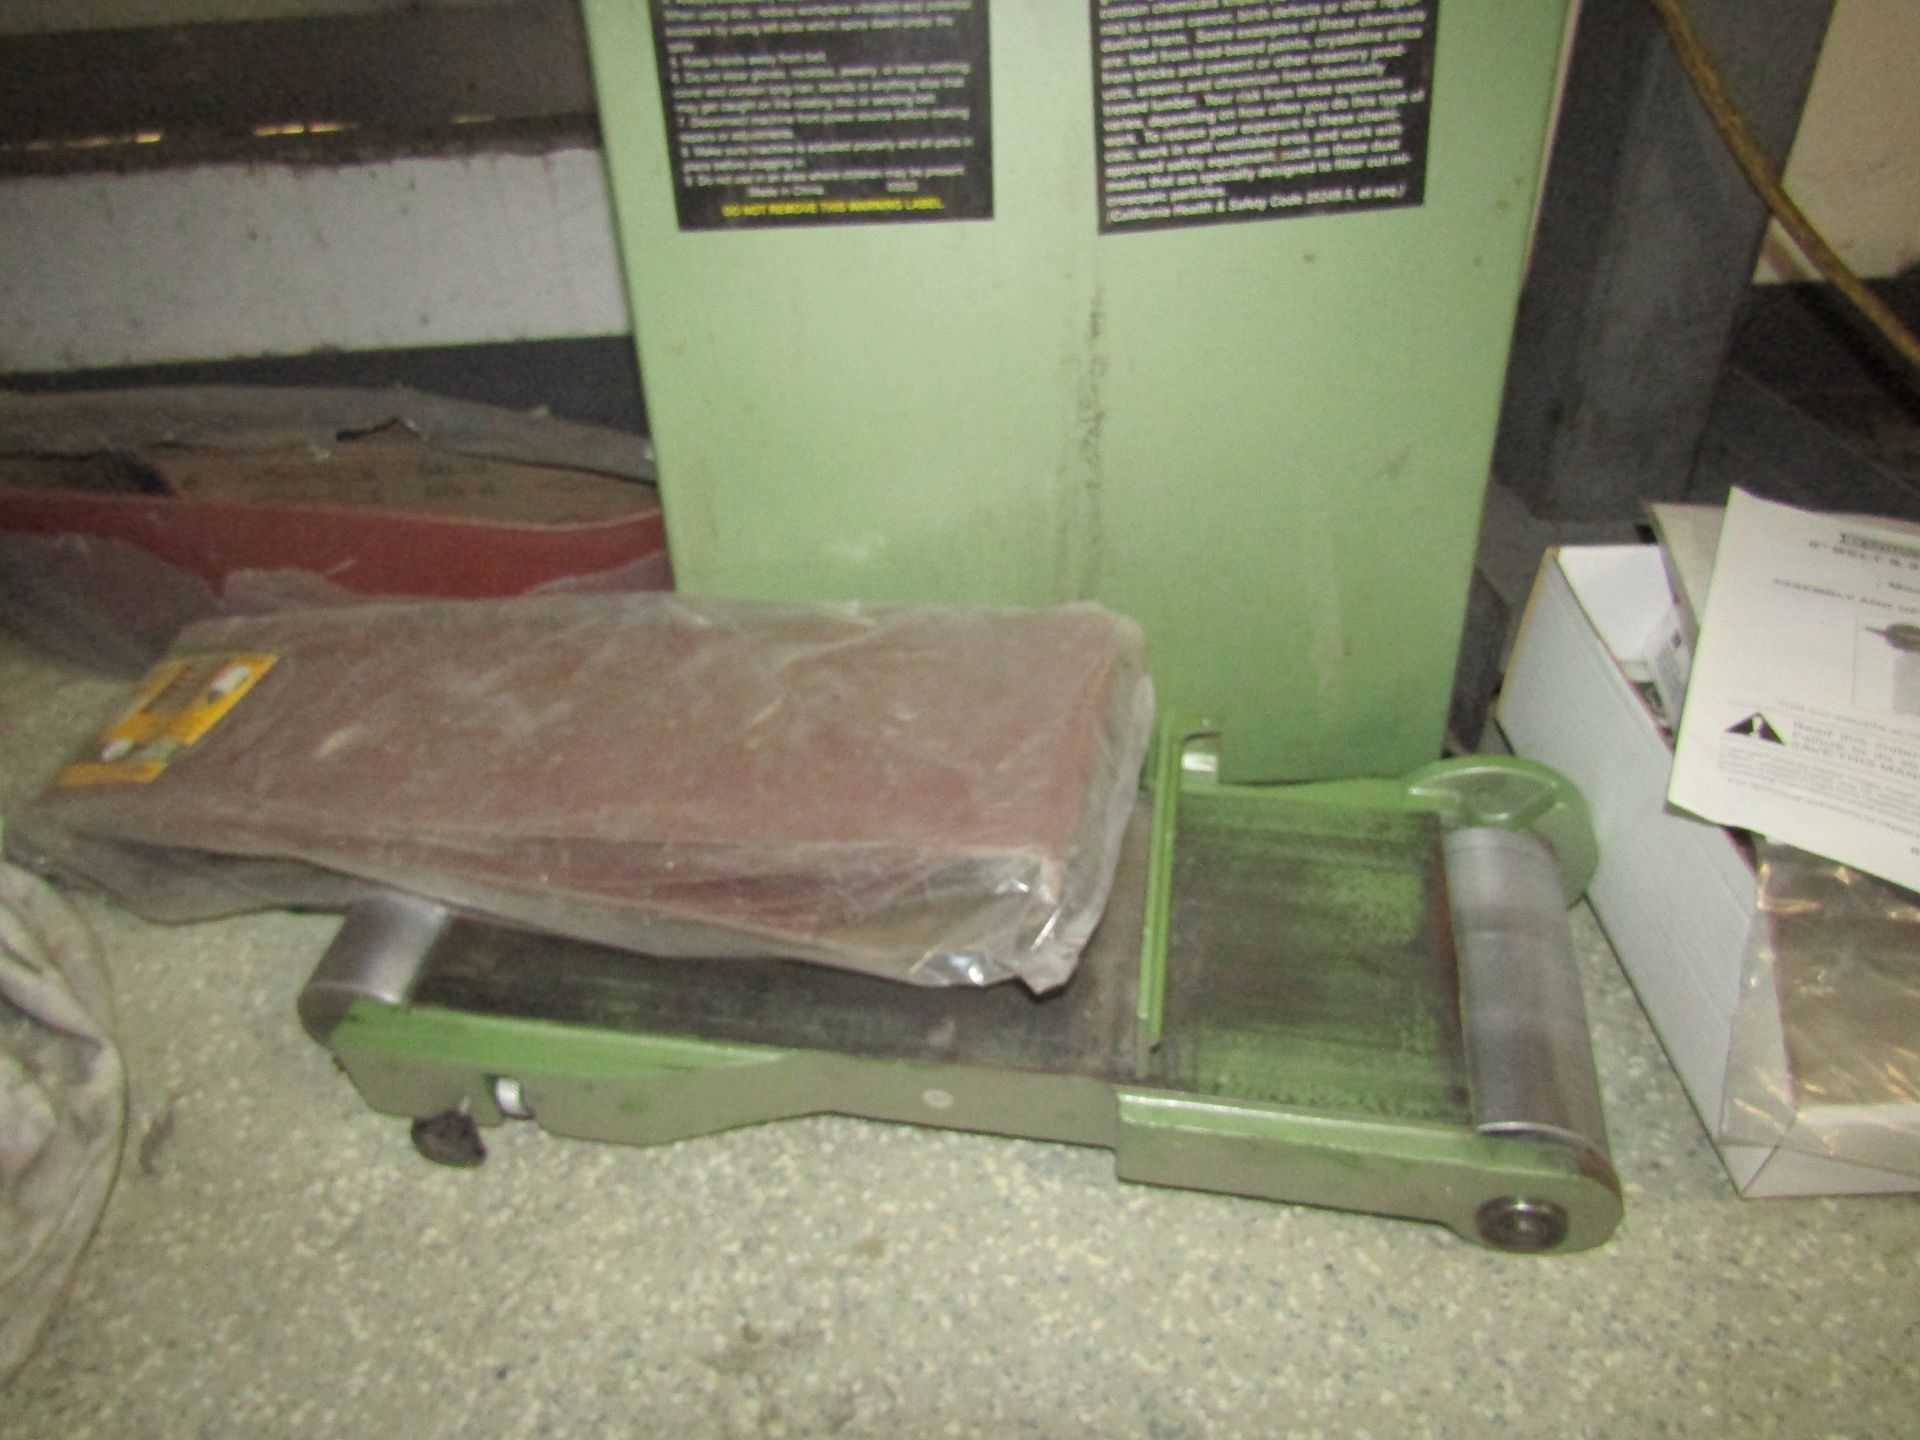 CENTRAL MACHINERY 6" Belt & 9" Disc Sander, Model 06852, With Spare Sand Paper - Image 2 of 4